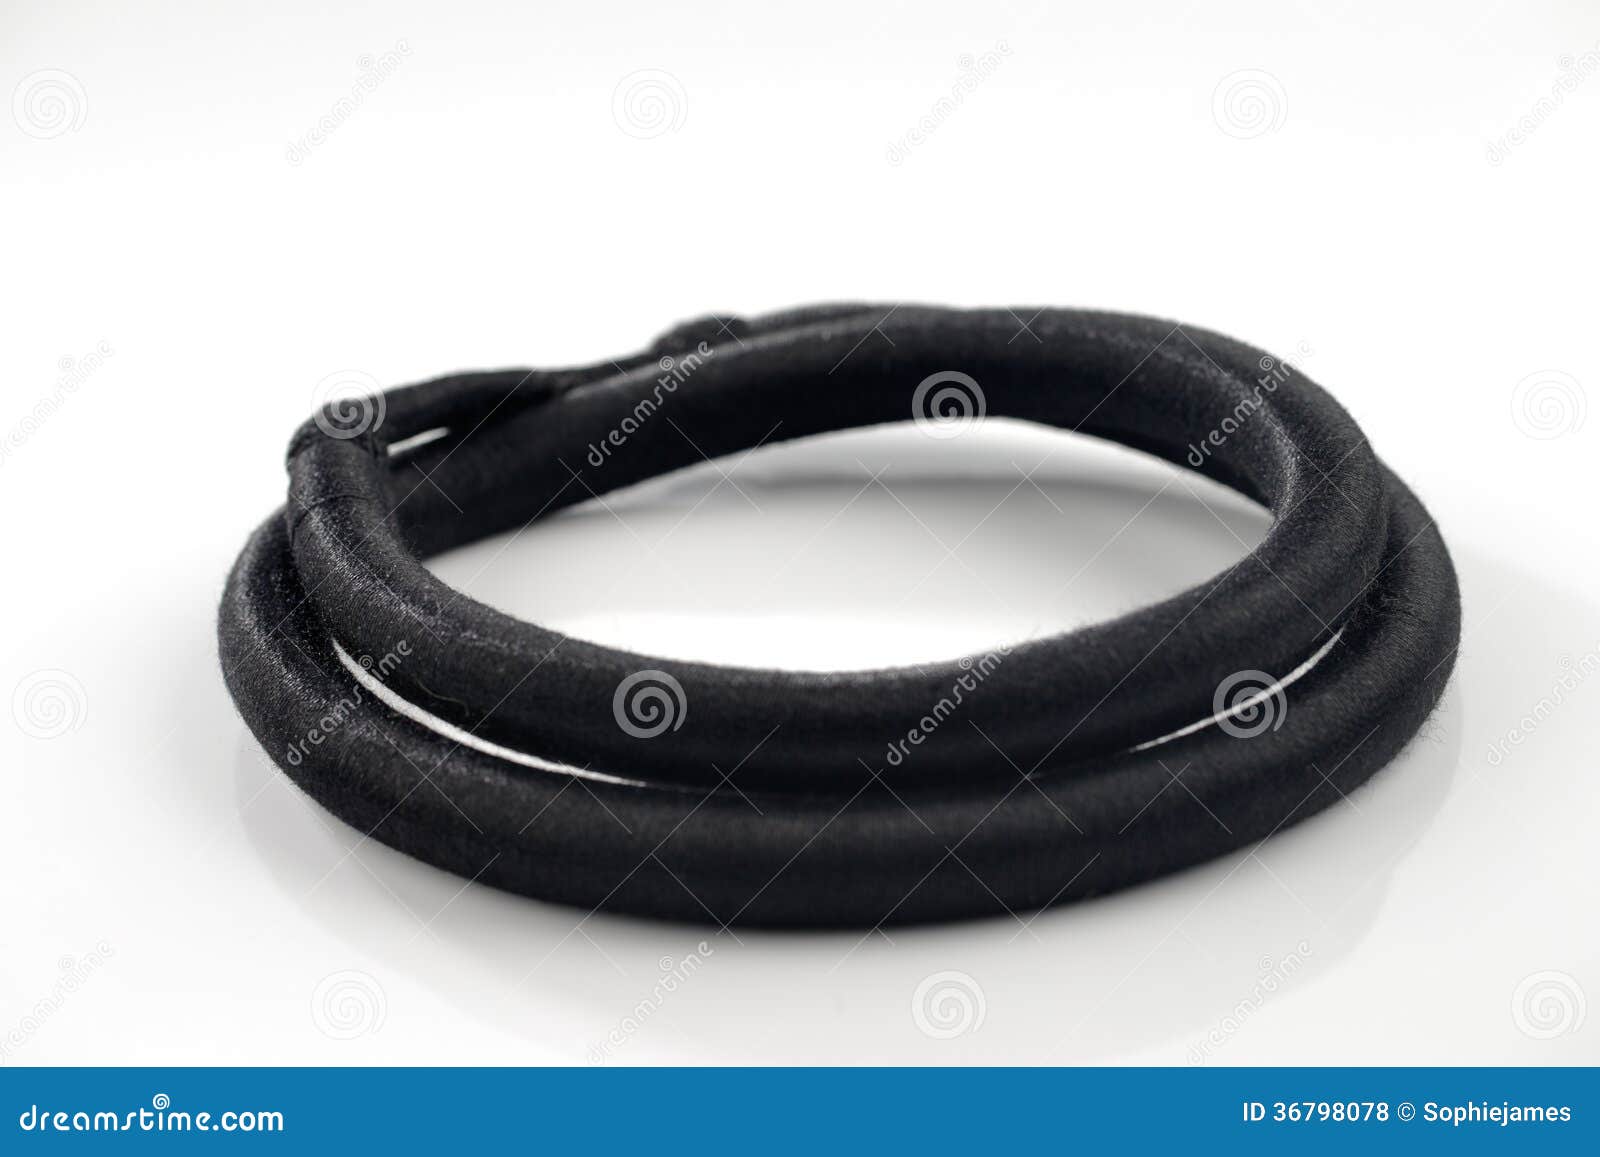 the agal is a black doubled cord, worn on head usually by arab men